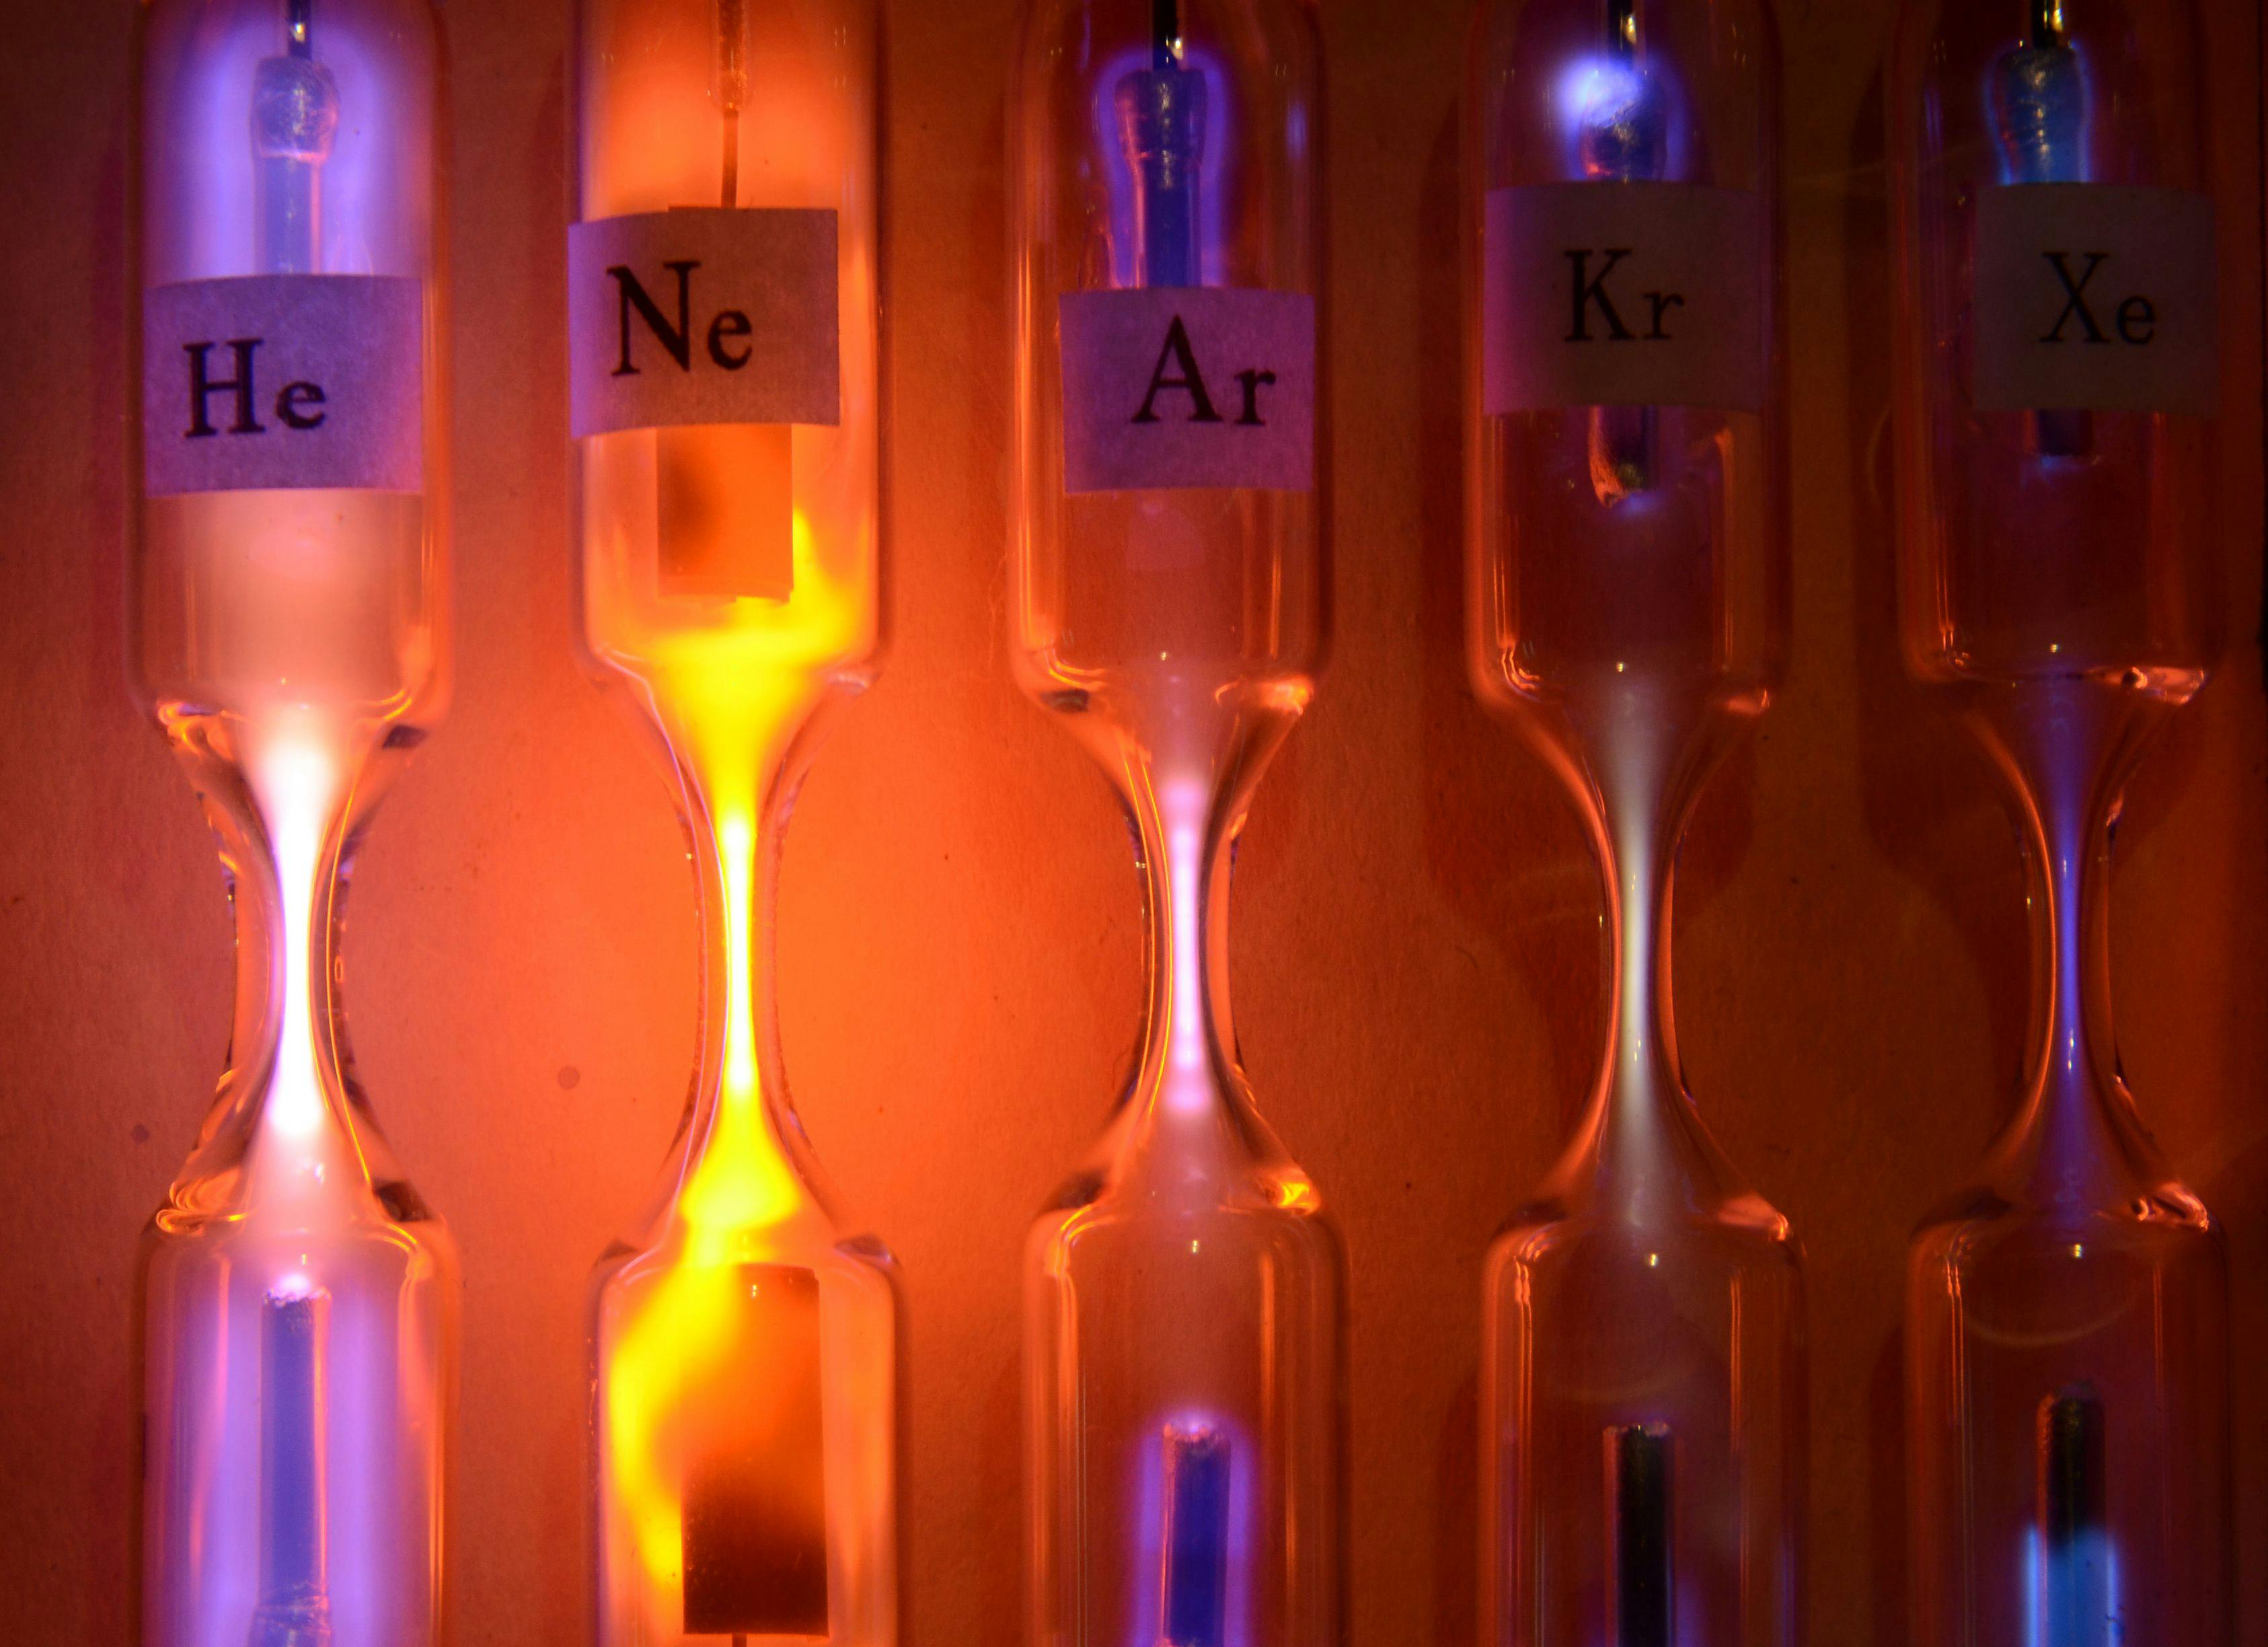 Tubes with inert gases excited with high voltage. From left to right: Helium, Neon, Argon, Krypton and Xenon. Each tube emits a different color and intensity. | Image Credit: © Kim - stock.adobe.com